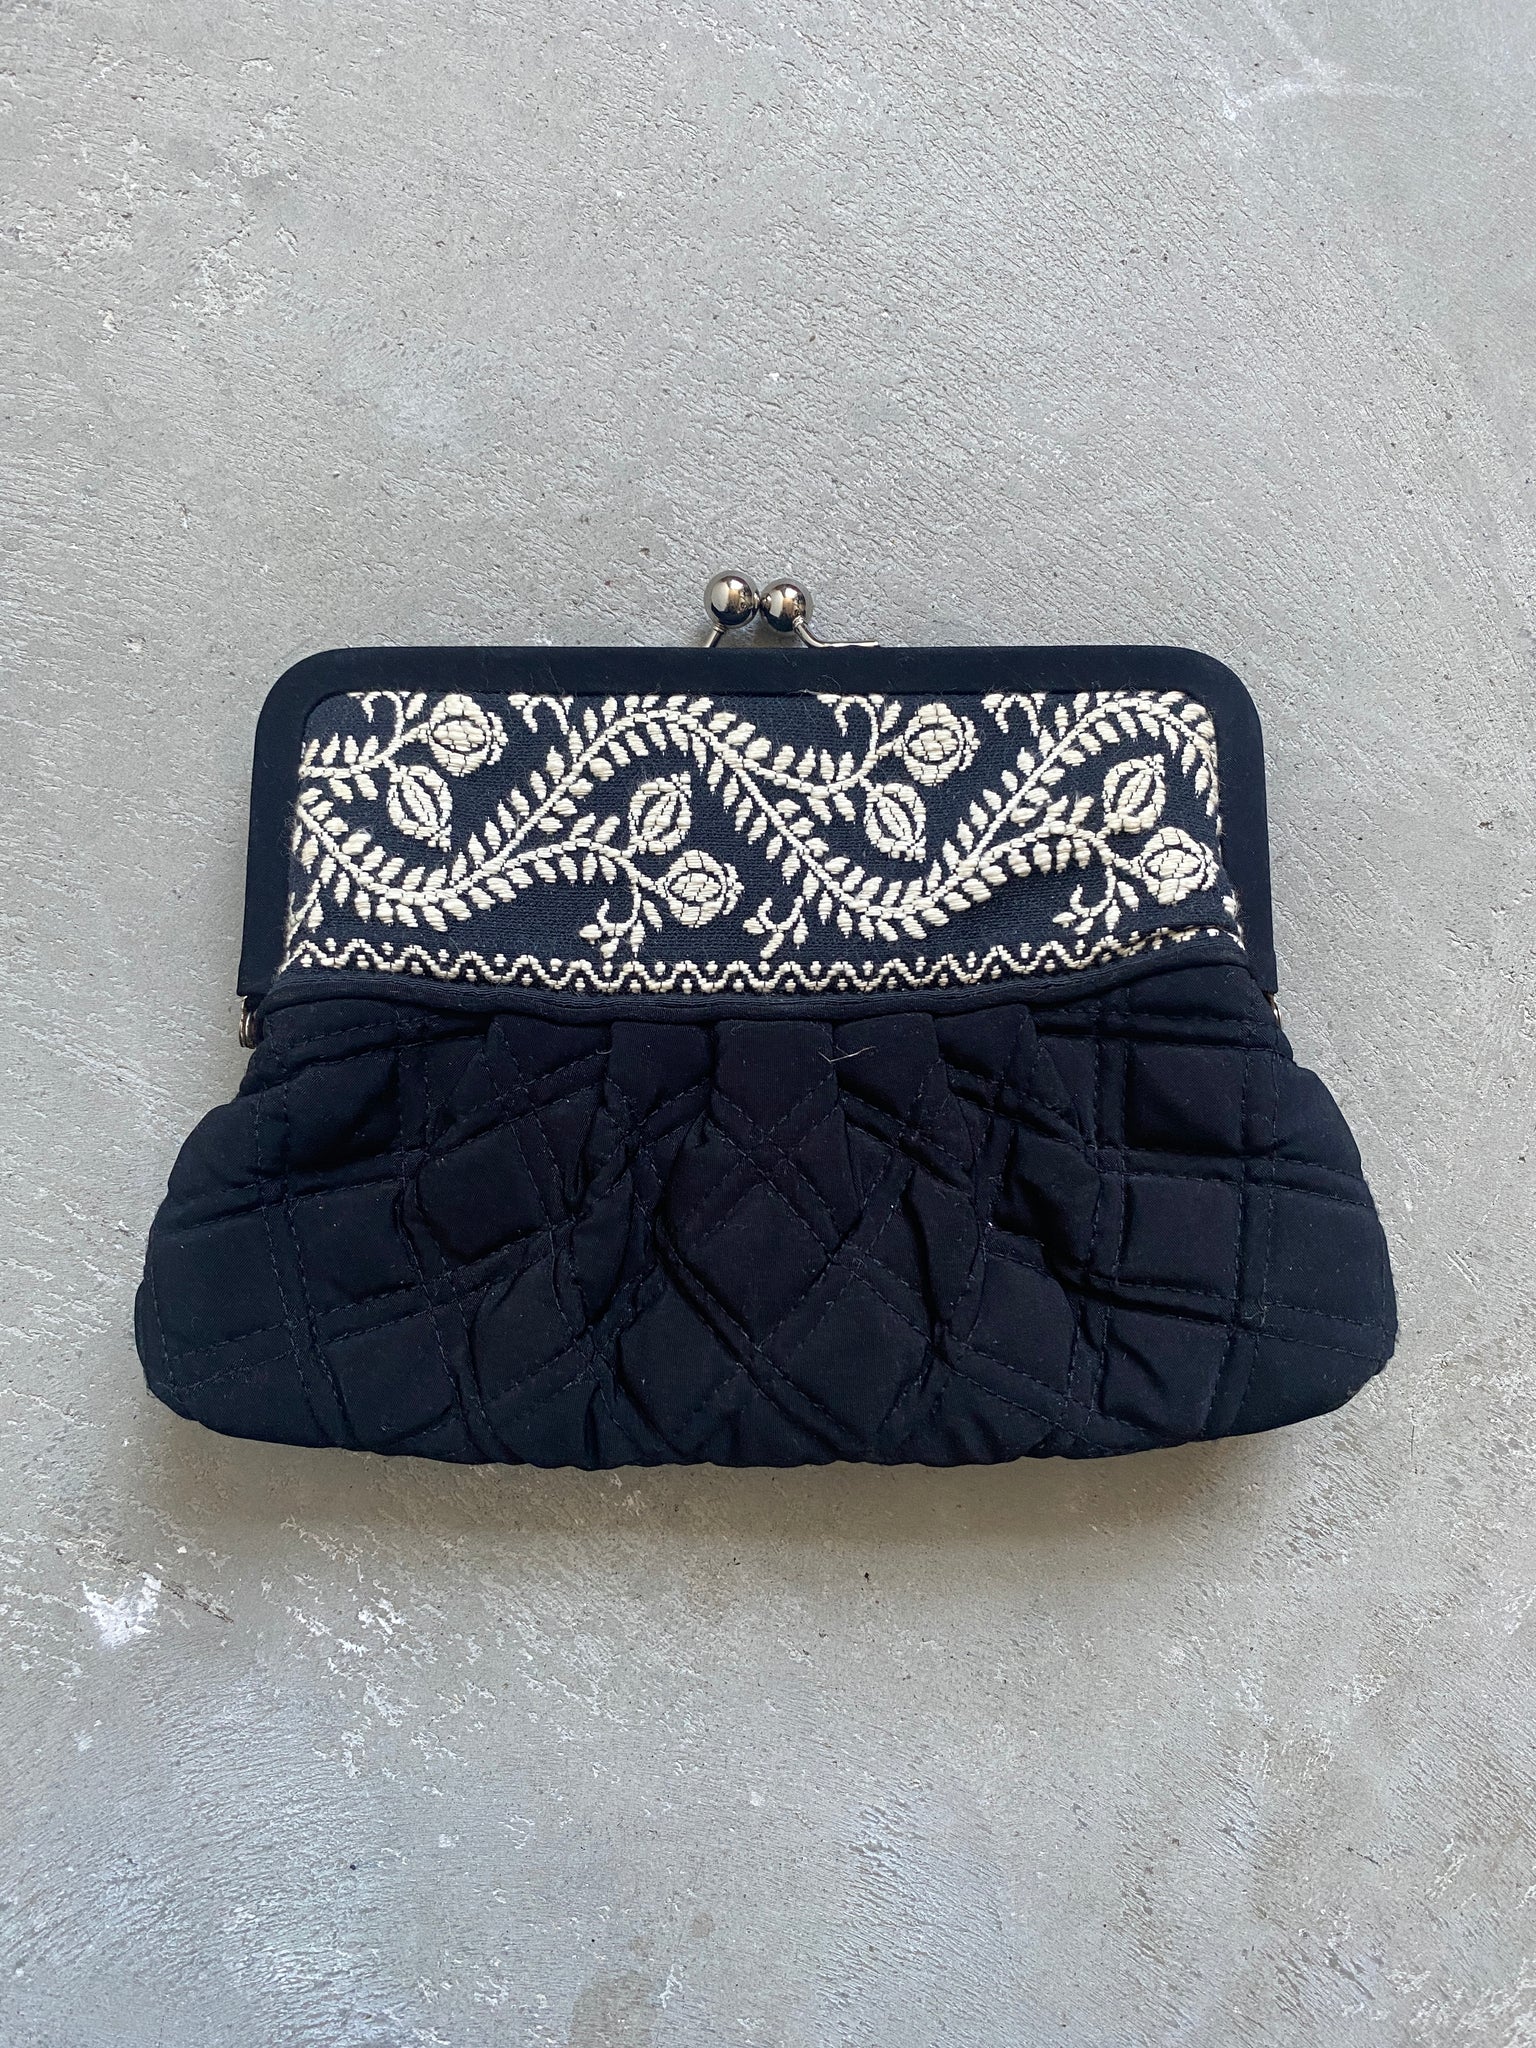 Vera Bradley Small Quilted and Embroidered Black Bag